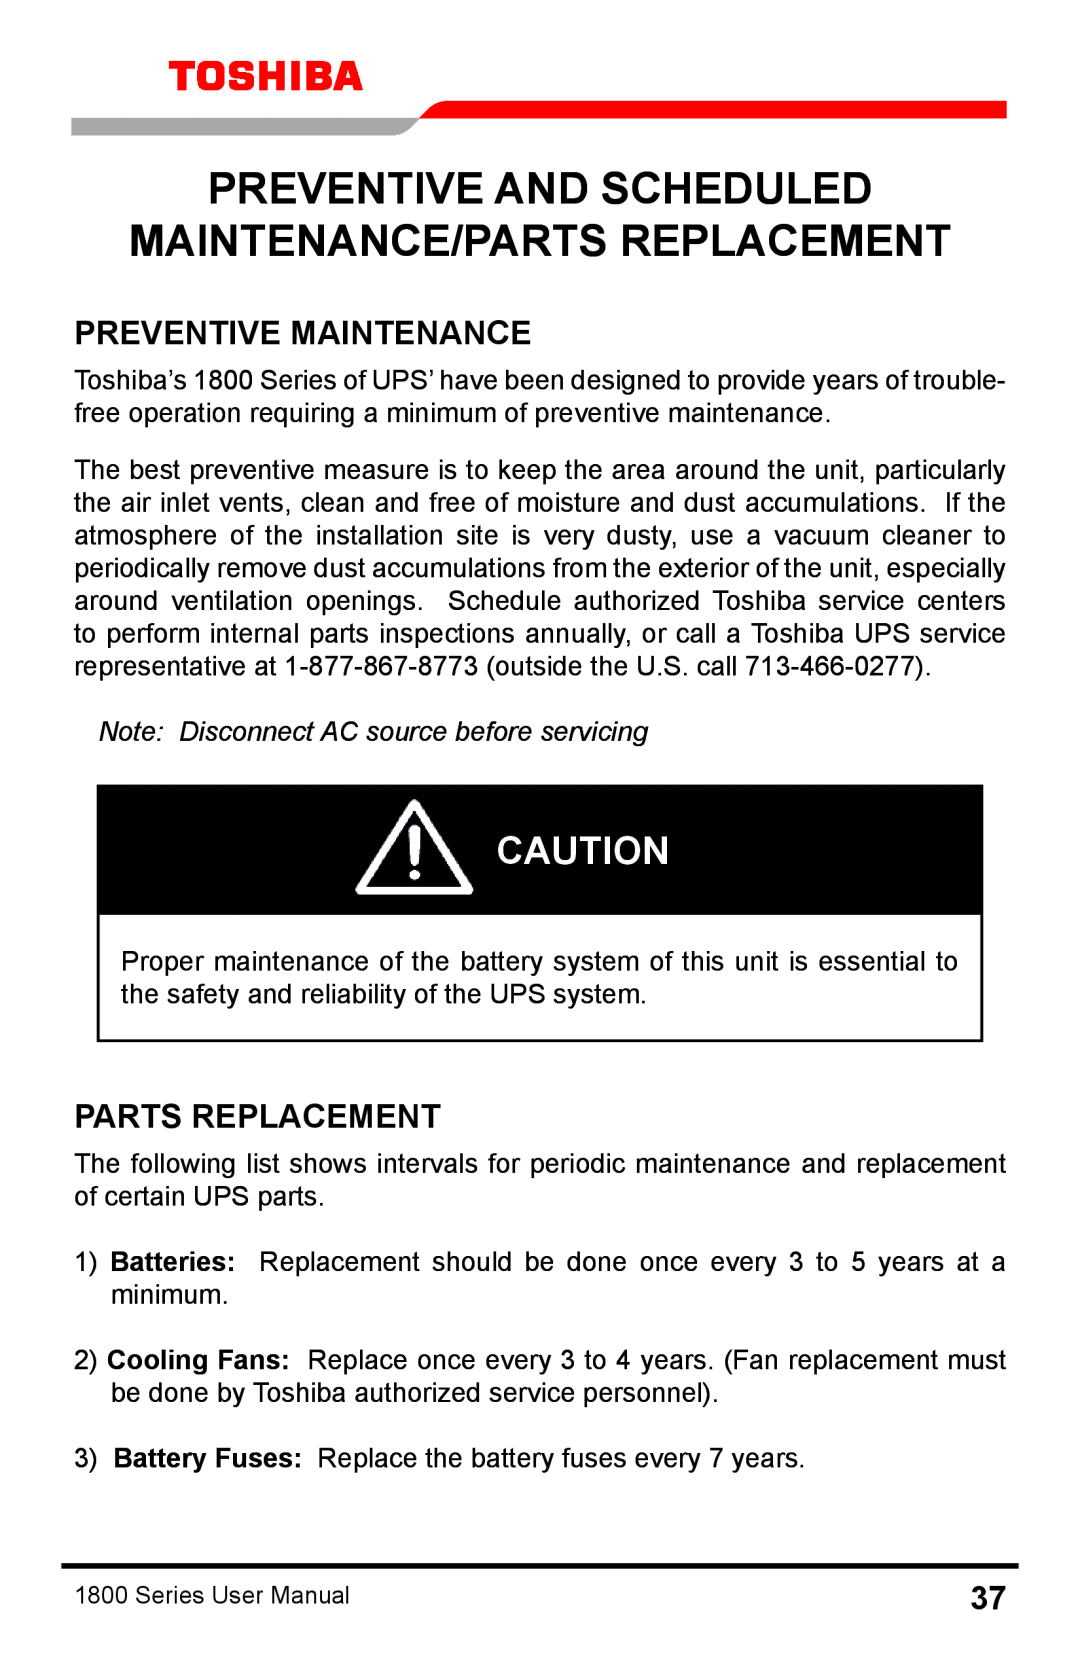 Toshiba 1800 manual Preventive and Scheduled Maintenance/Parts Replacement, Preventive Maintenance 